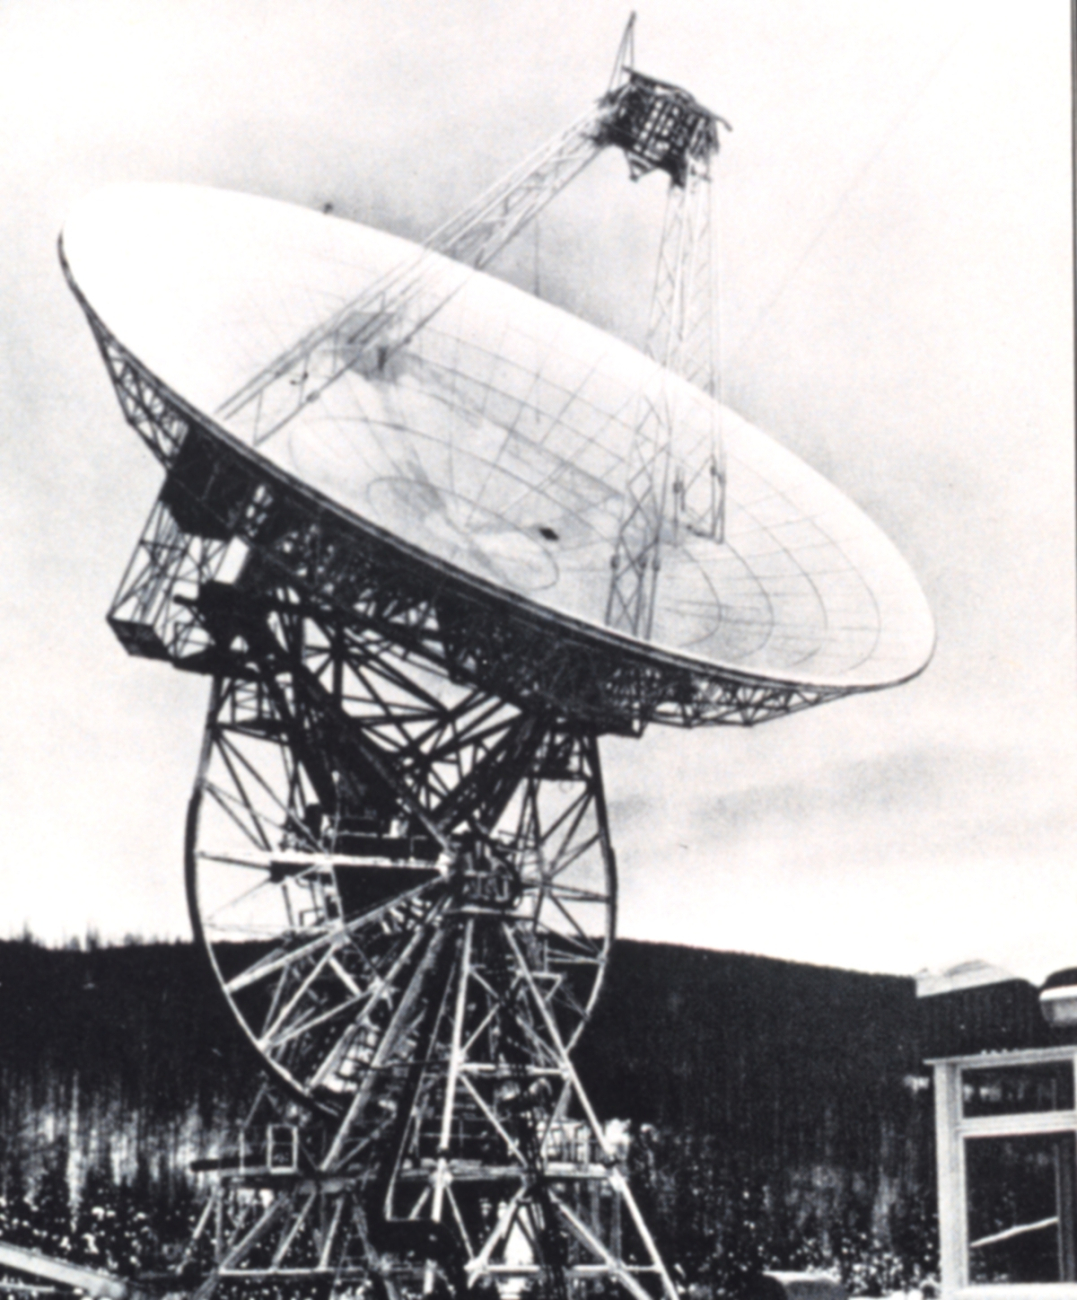 An 85-foot diameter parabolic antenna used to send commands and receiveinformation from meteorological satellites